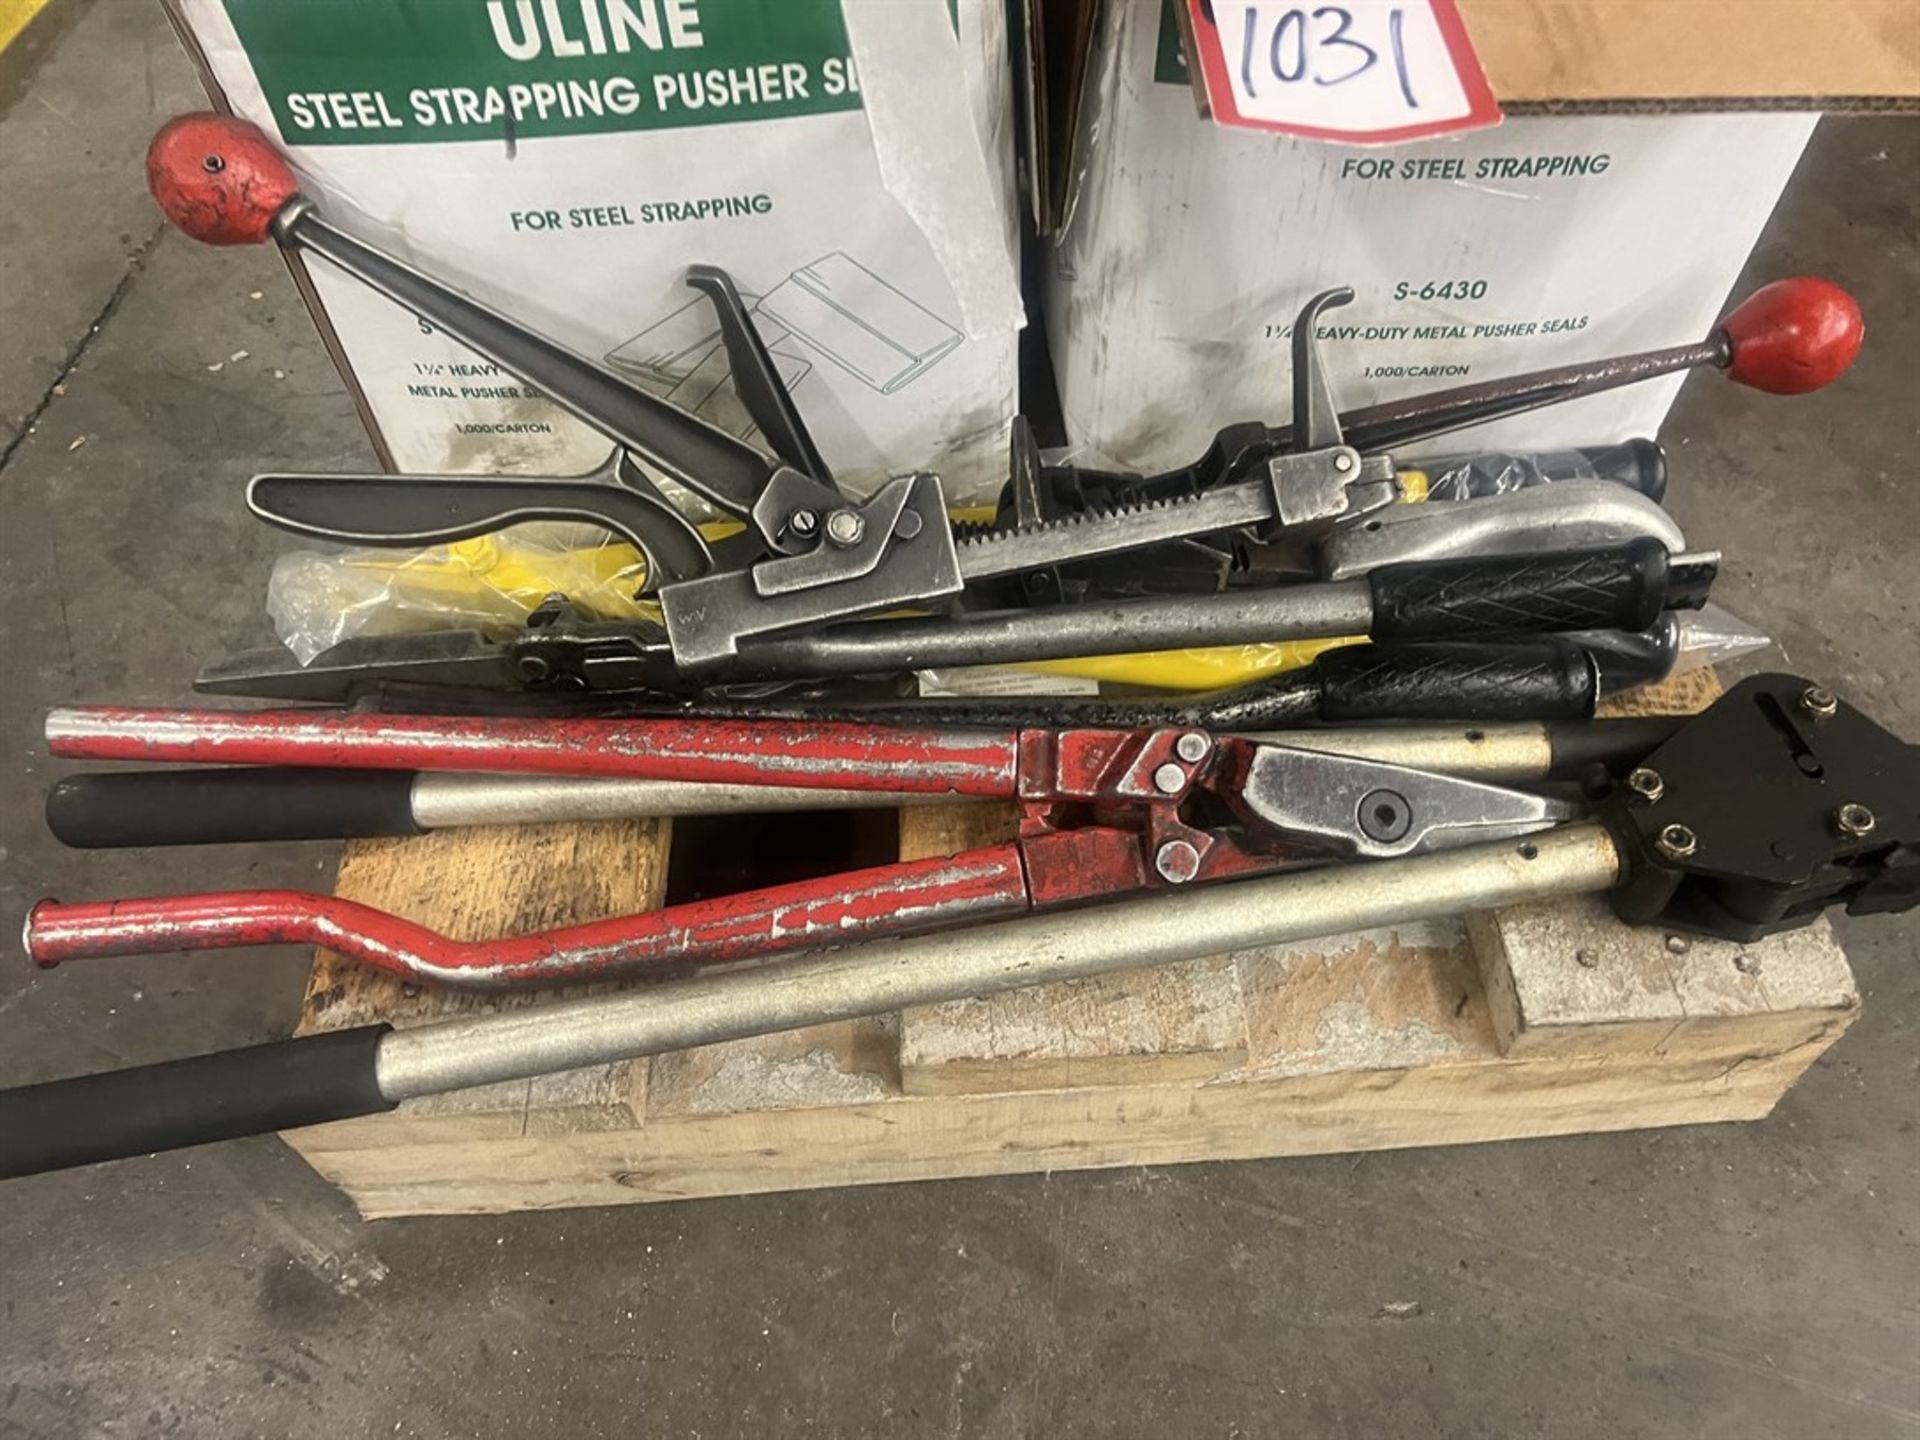 Lot of Assorted Banding Cart Tool Including Tensioners, Cutters, Sealers and (2) Boxes of Clips - Image 2 of 2